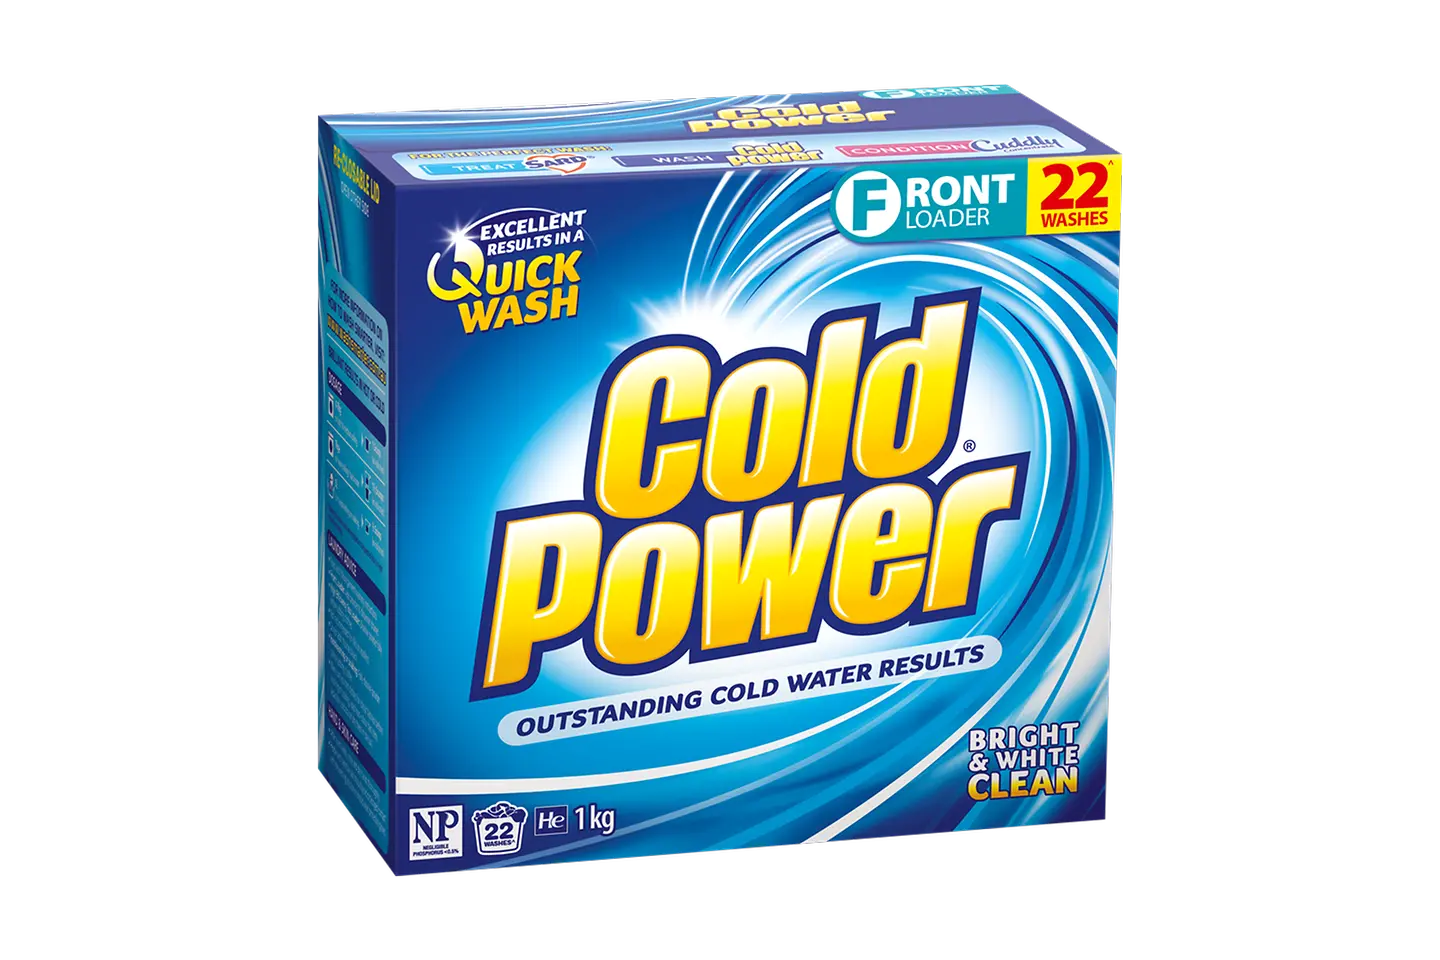 Cold Power